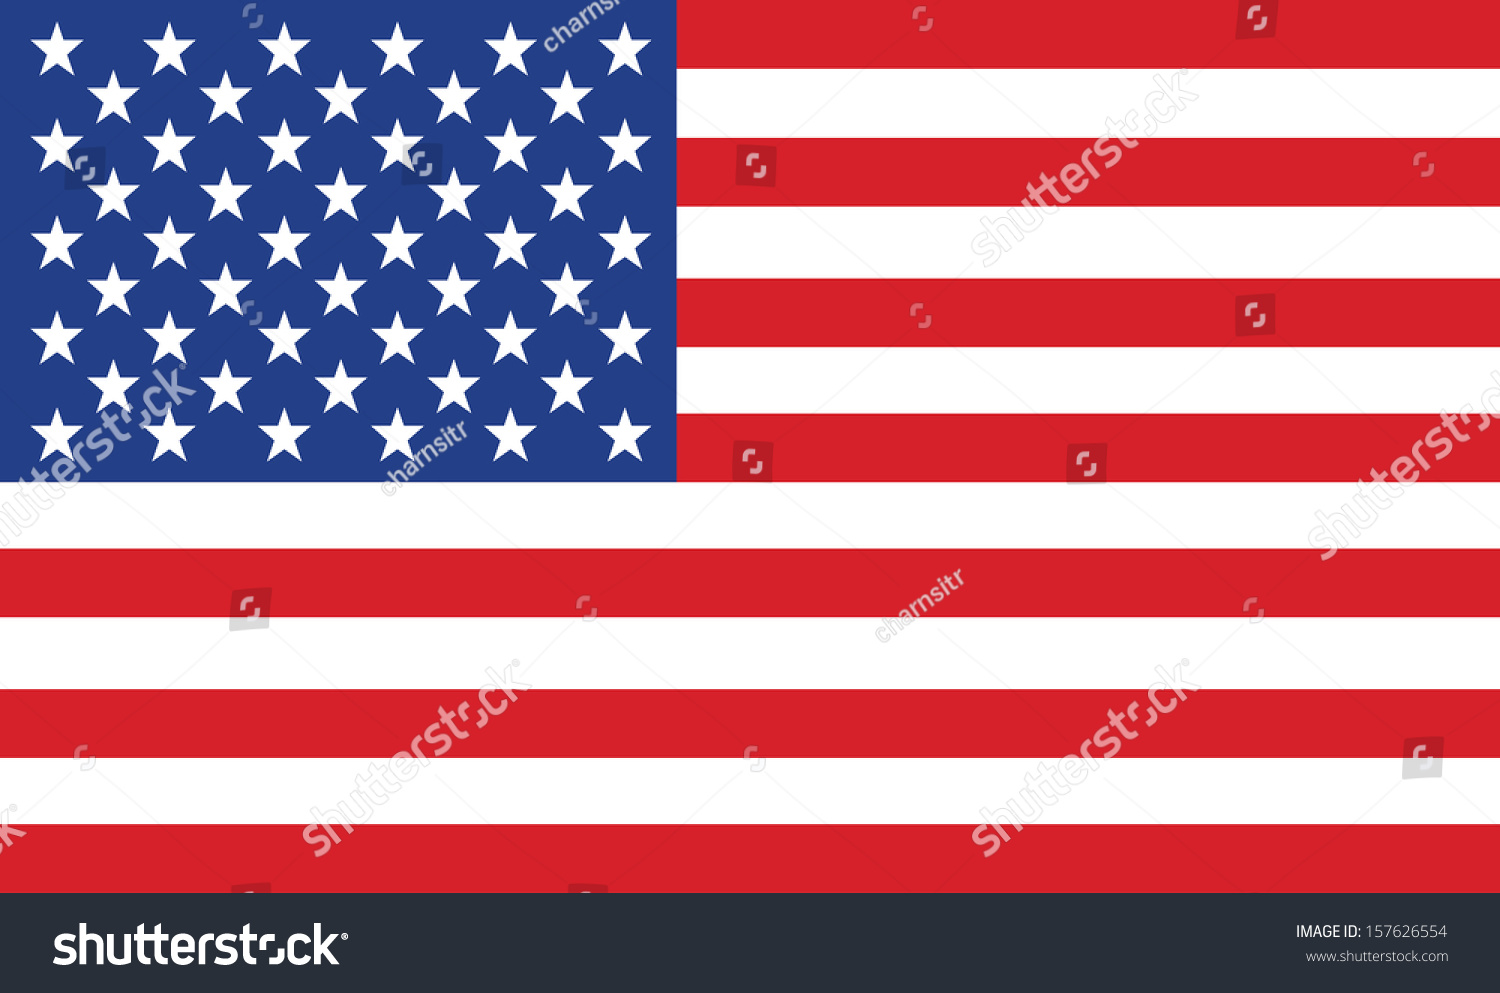 vector image of american flag #157626554